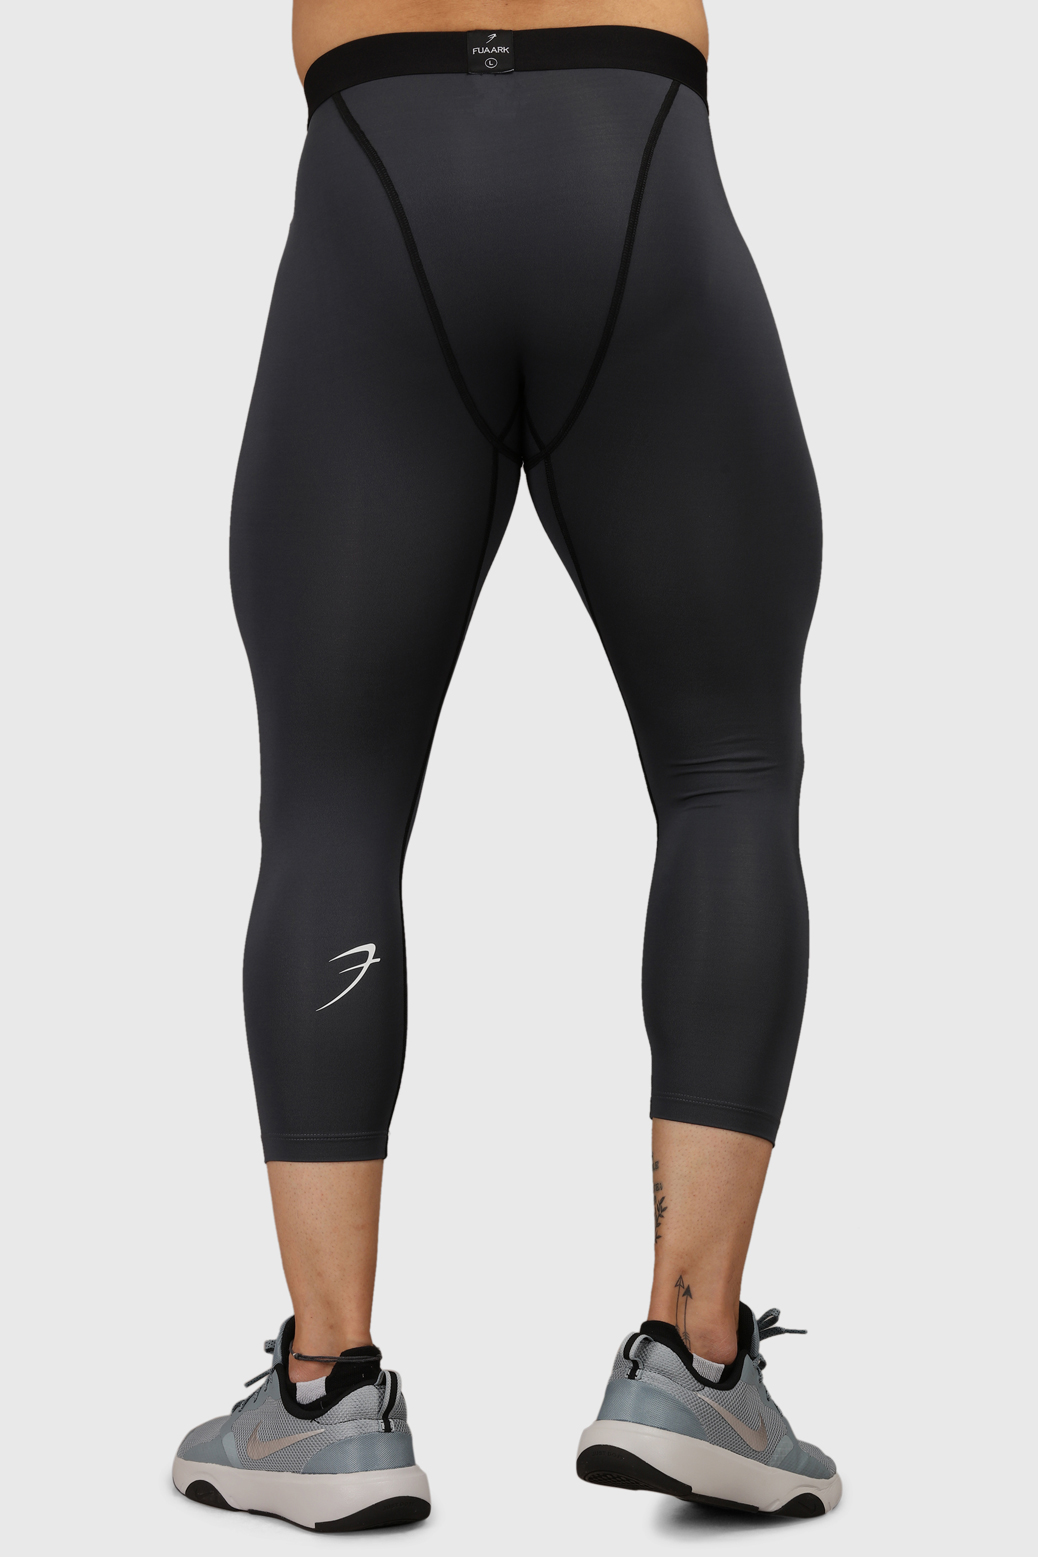 Fuaark Gym Compression Grey Tights  Buy Tights For Men Online in New  Zealand